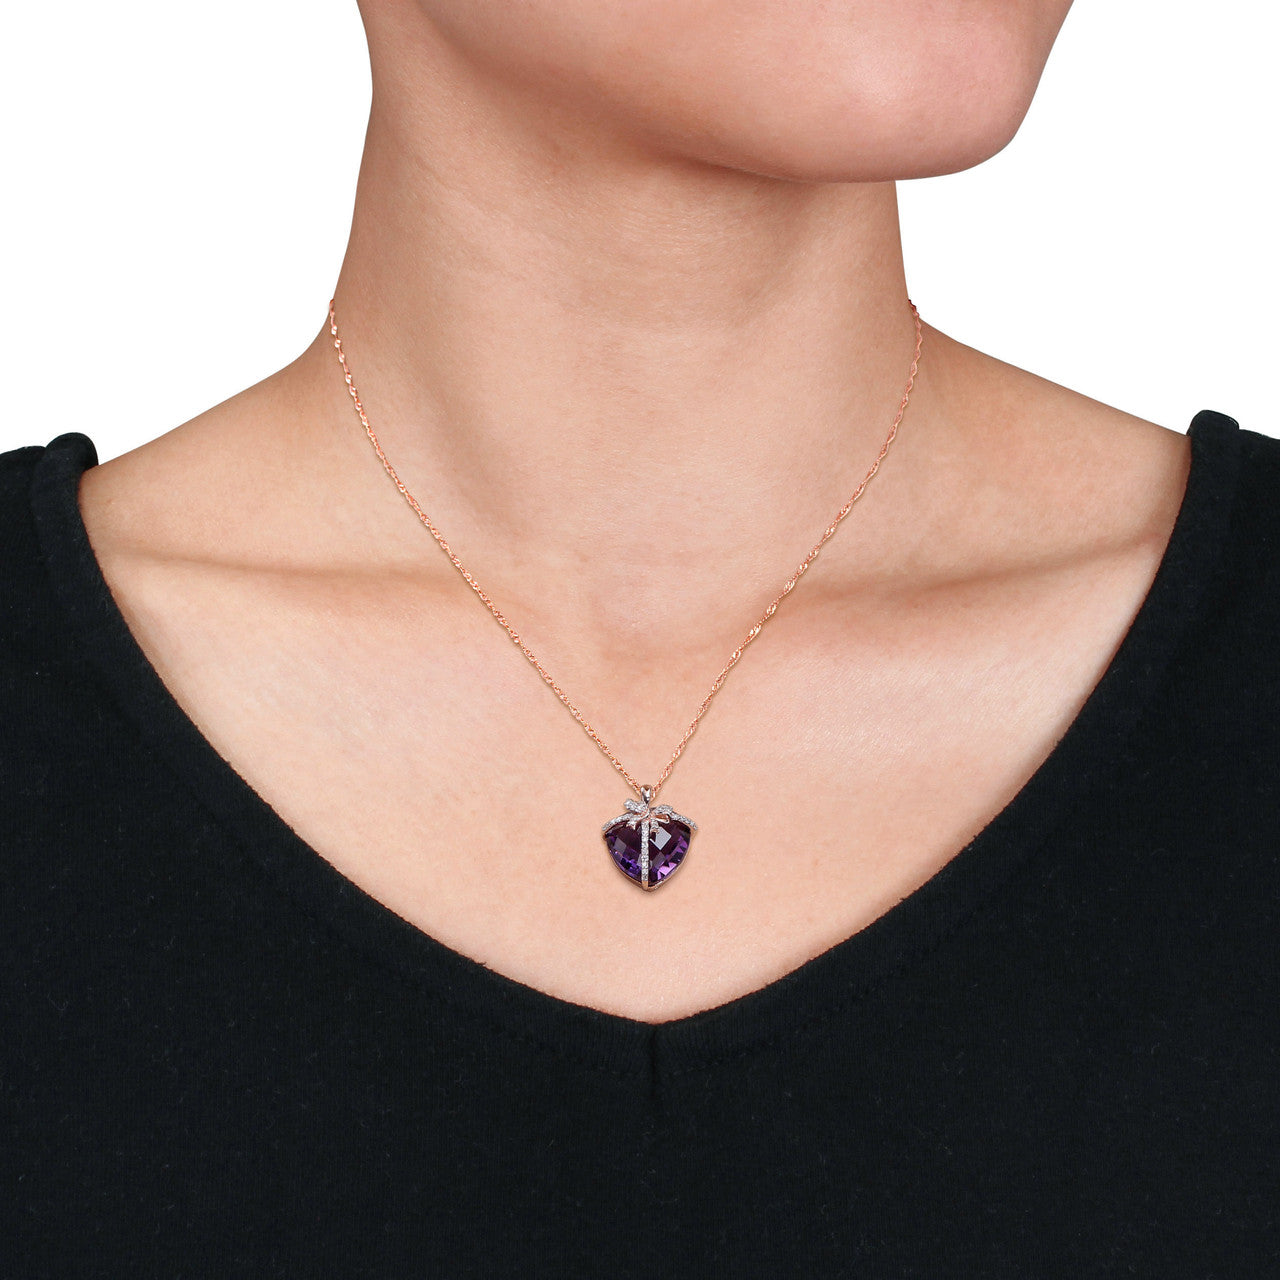 Ice Jewellery 1/8 CT Diamond And 12 CT Amethyst Bow Pendant With Chain in 10k Pink Gold - 75000005662 | Ice Jewellery Australia